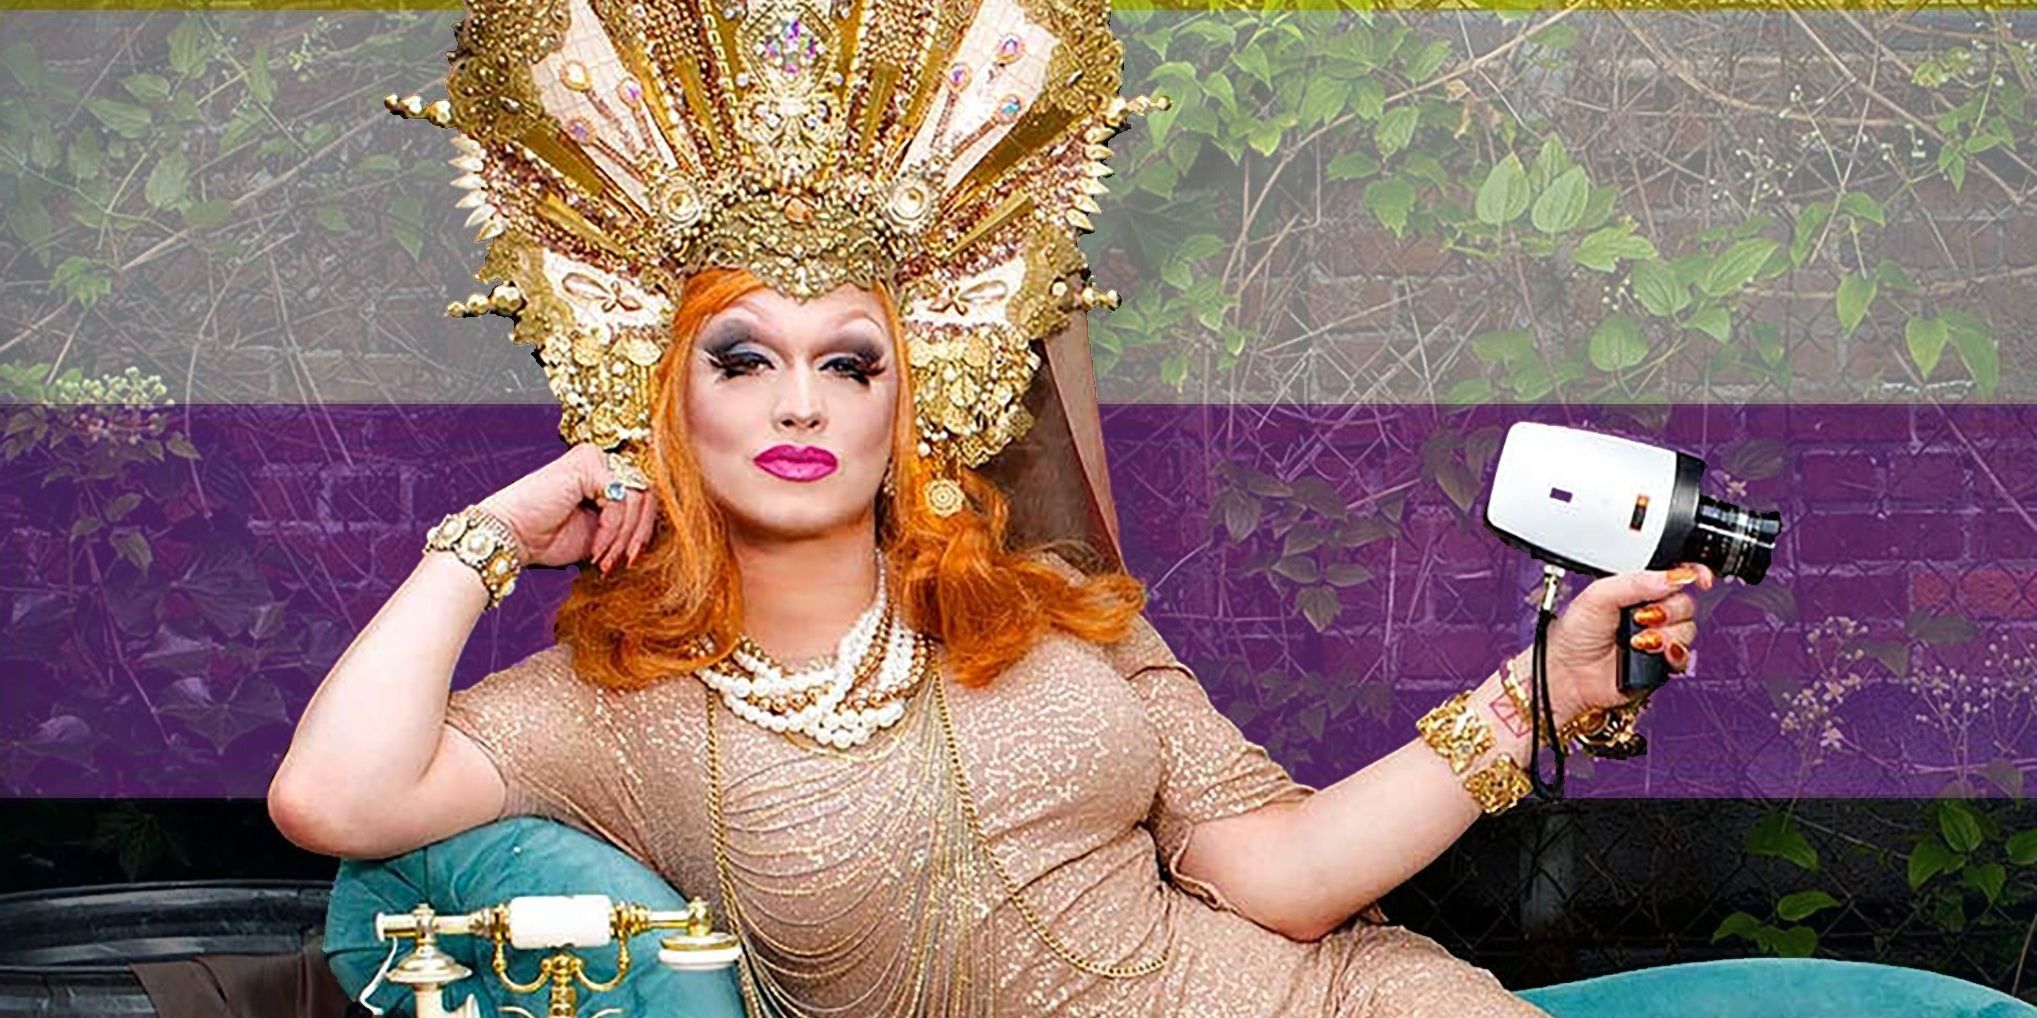 Jinkx holding a camera and wearing an elaborate headpiece. 